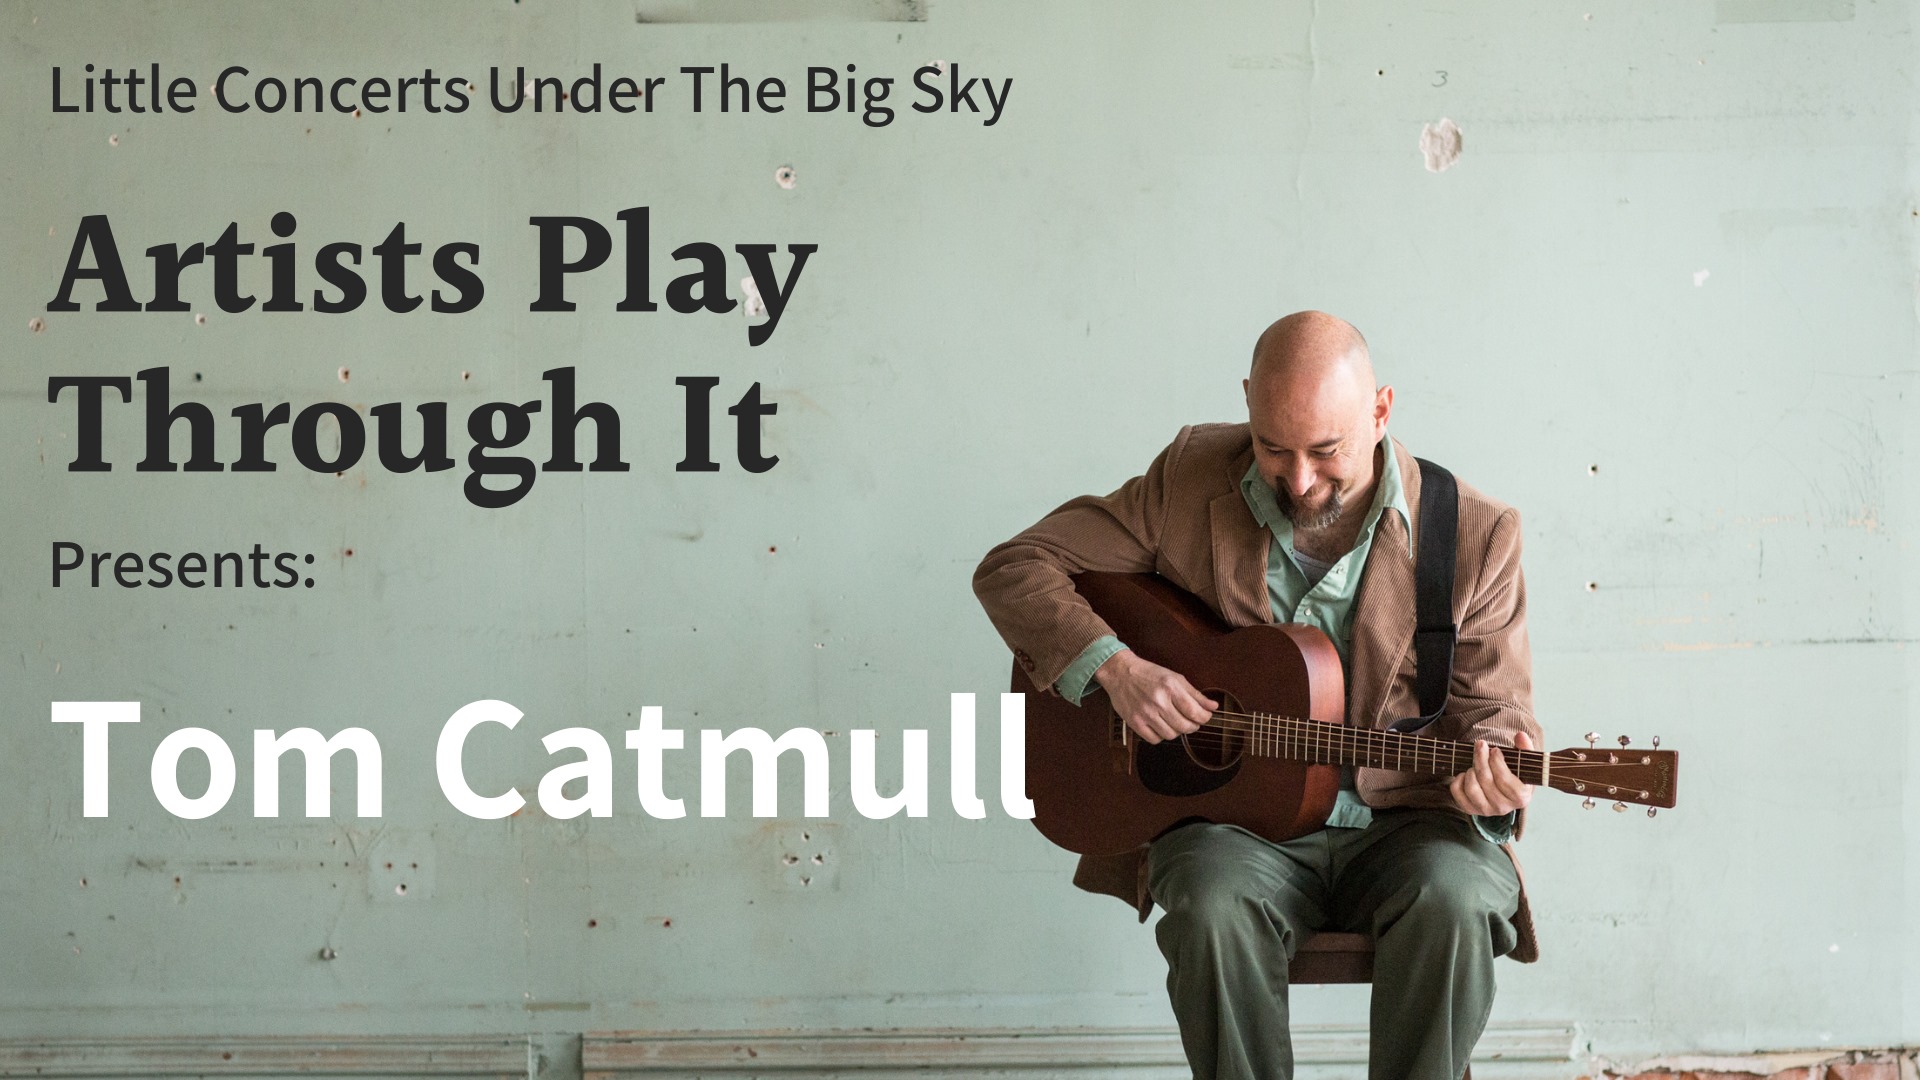 Artists Play Through It Presents: Tom Catmull